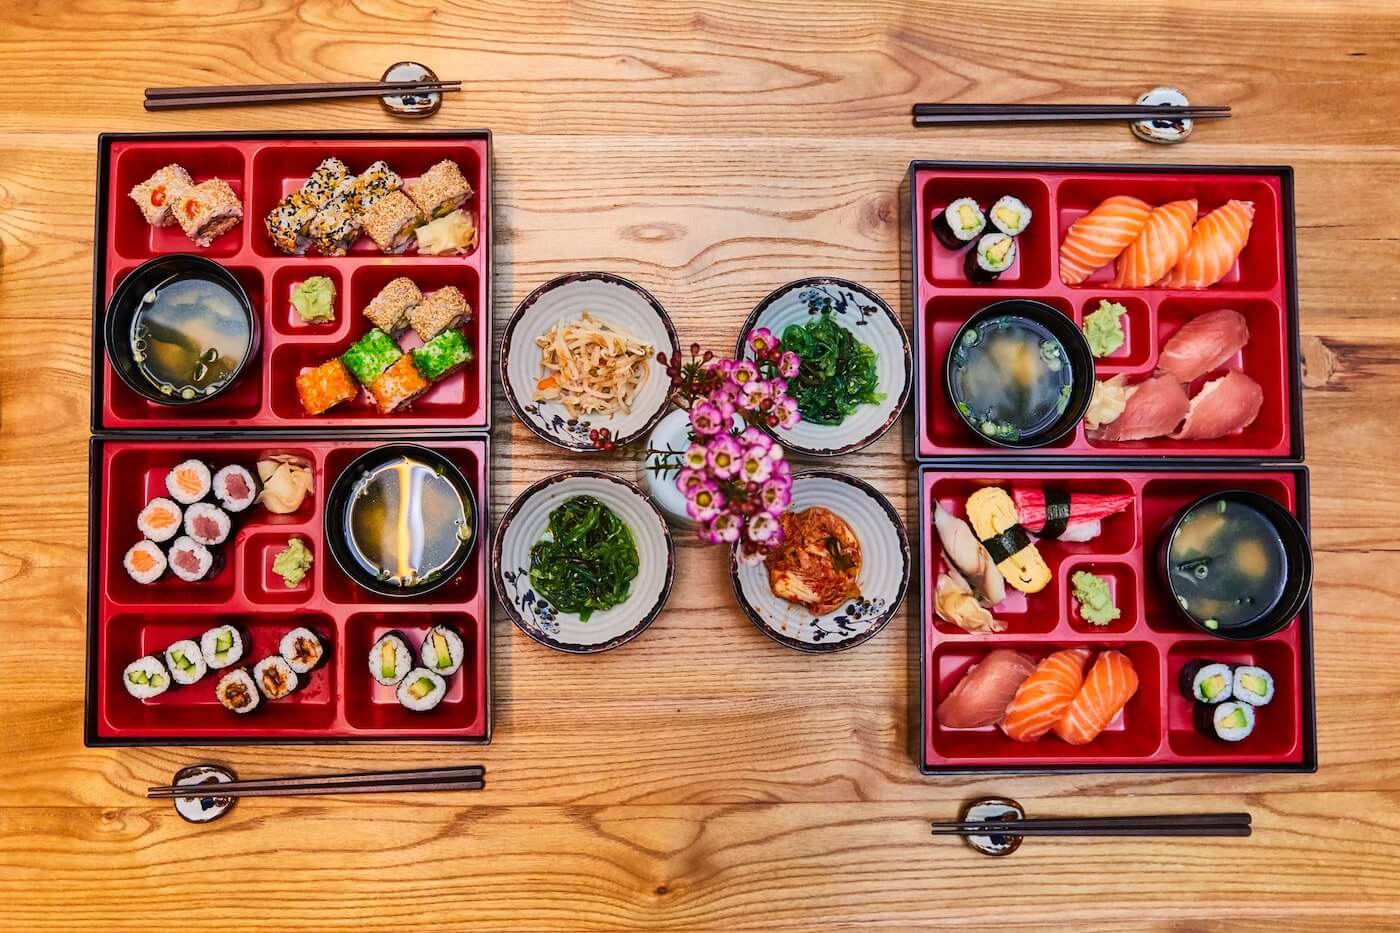 japanese food displayed in red lacqured boxes